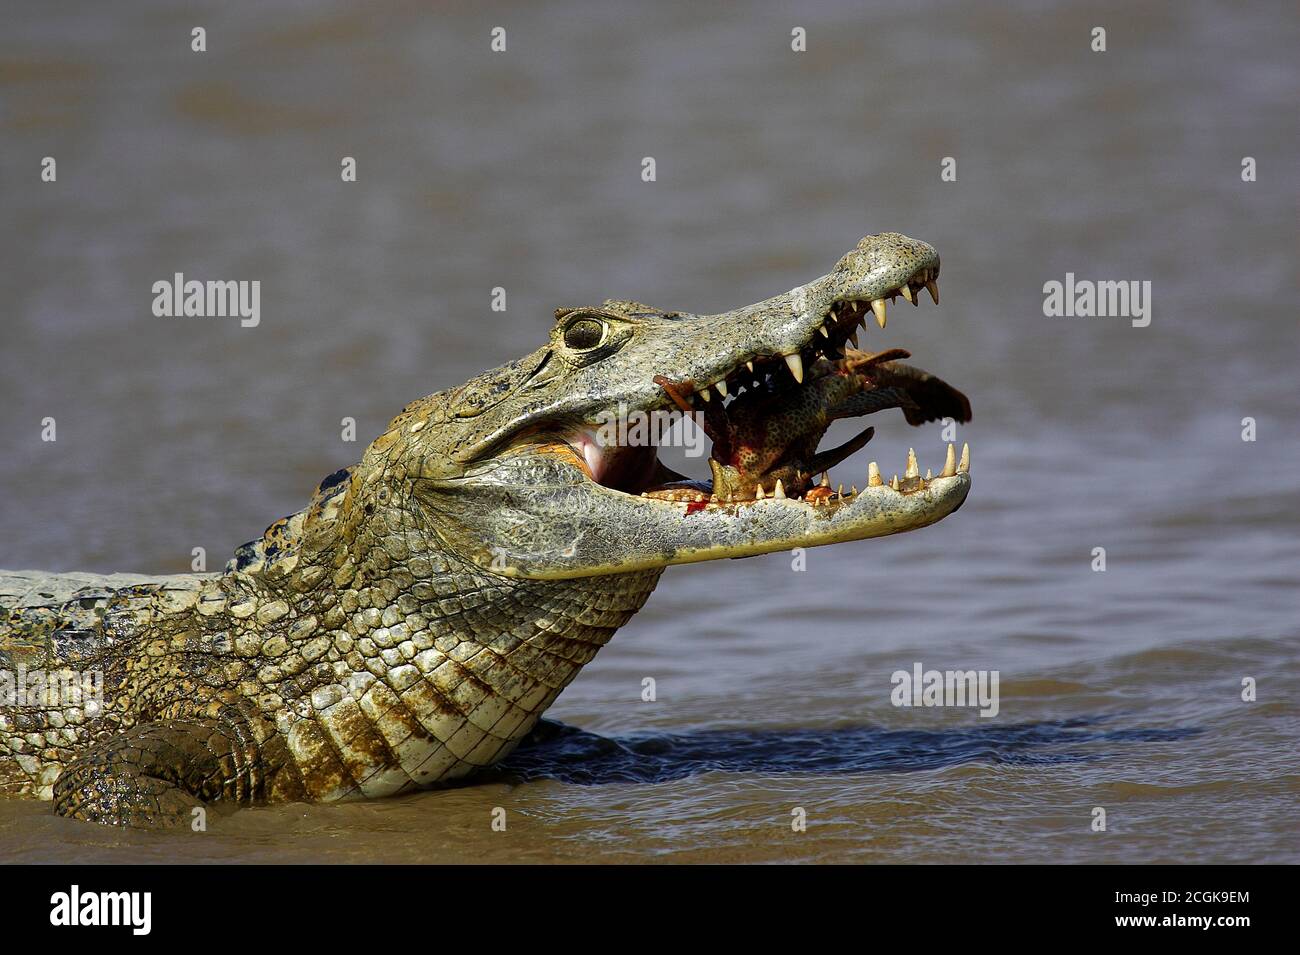 Spectacled Caiman, caiman crocodilus, Adult catching Fish, Los Lianos in Venezuela Stock Photo